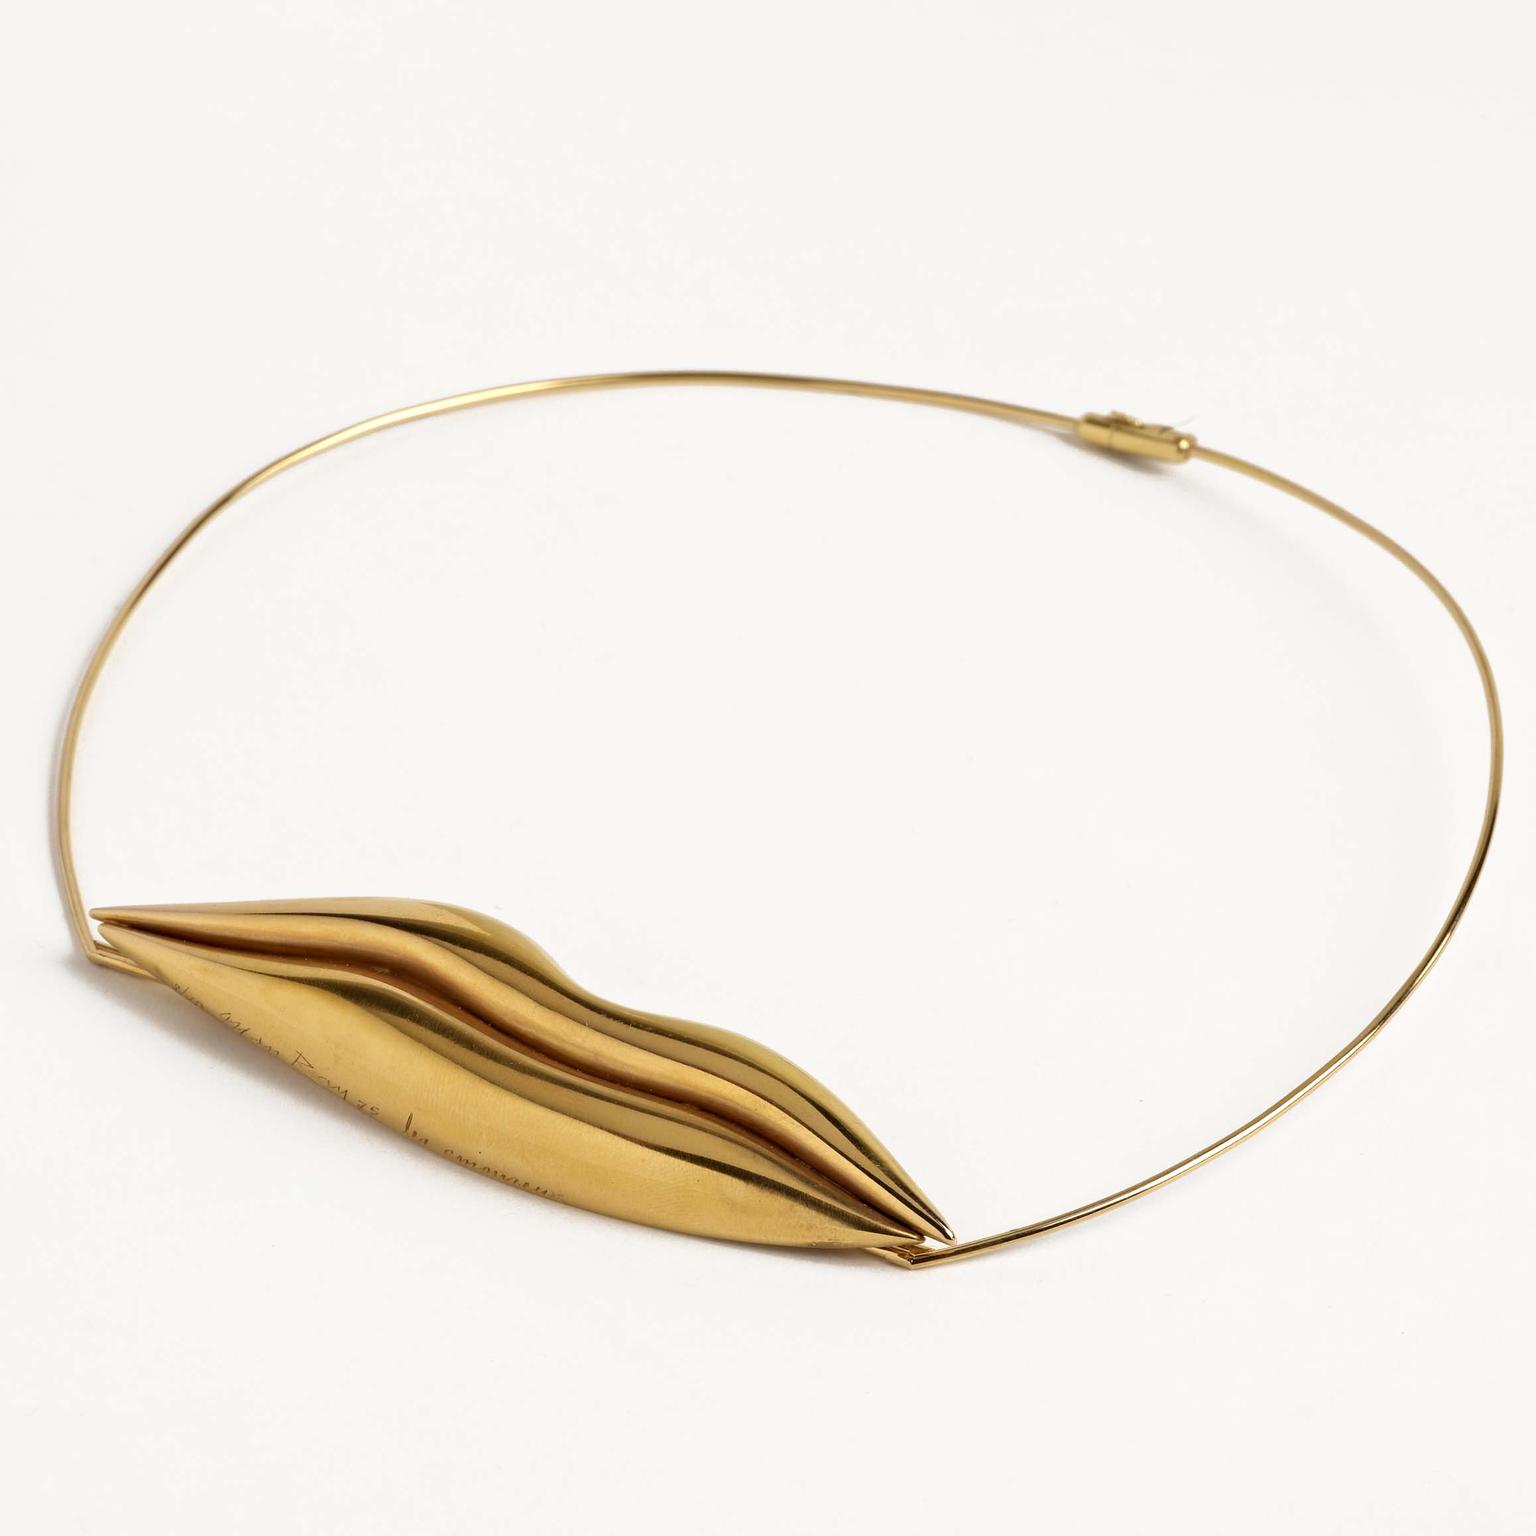 Les Amoureux necklace from Man Ray